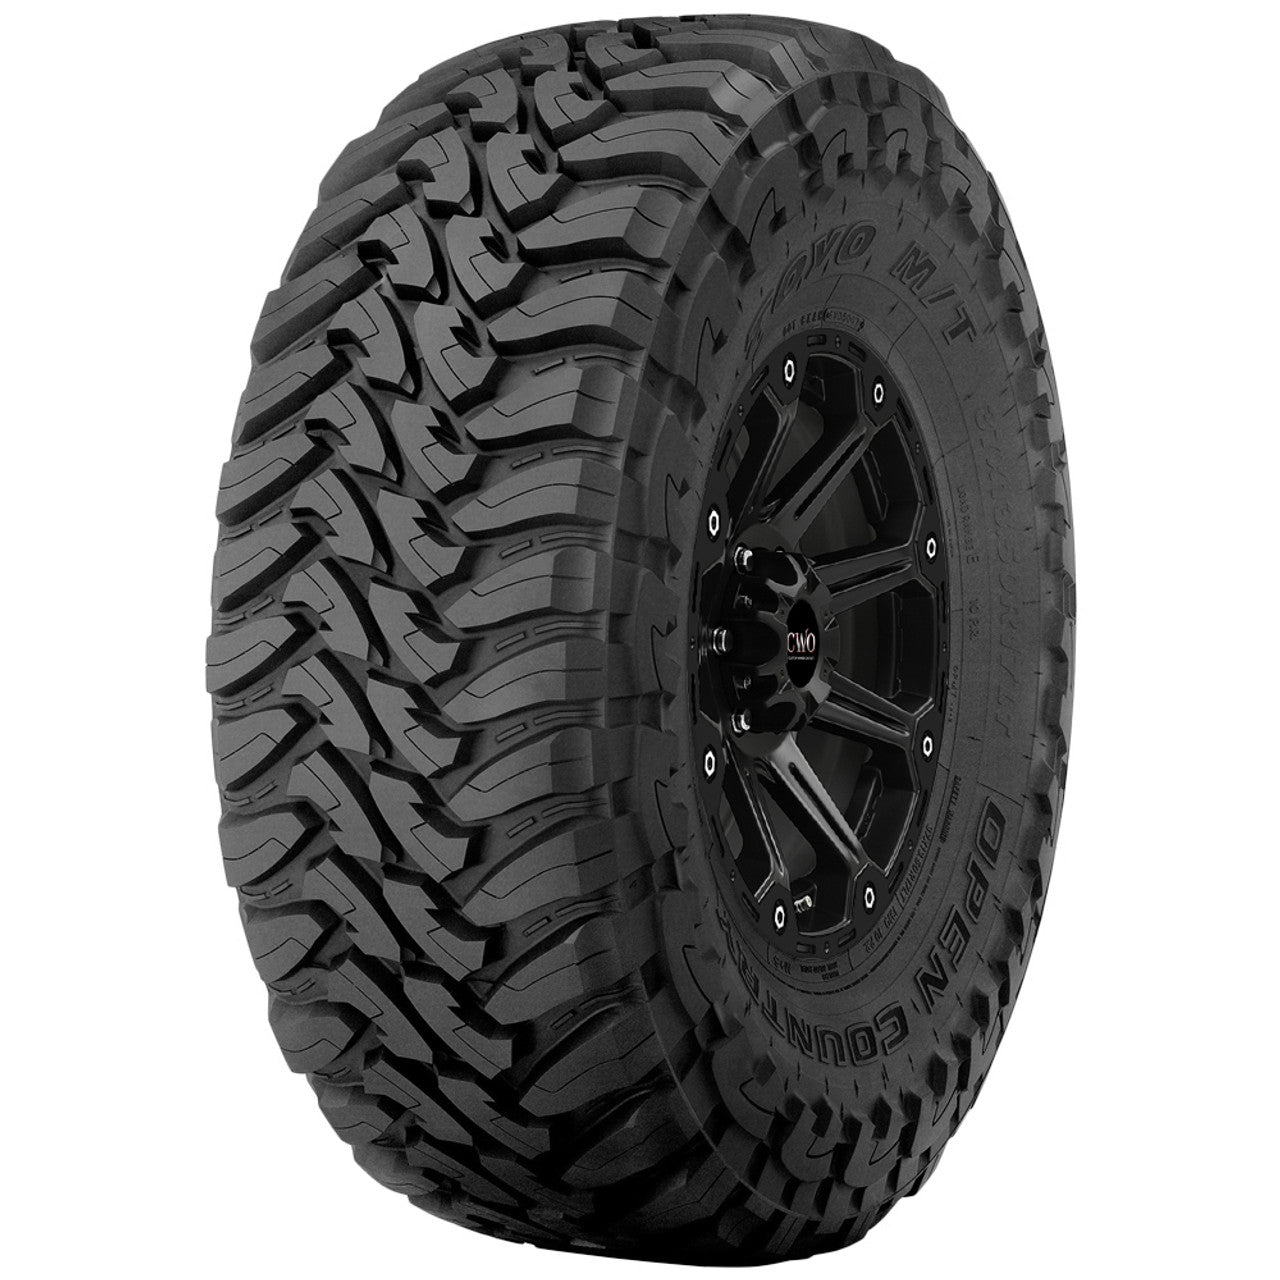 Toyo Open Country Mt - 265/70-18